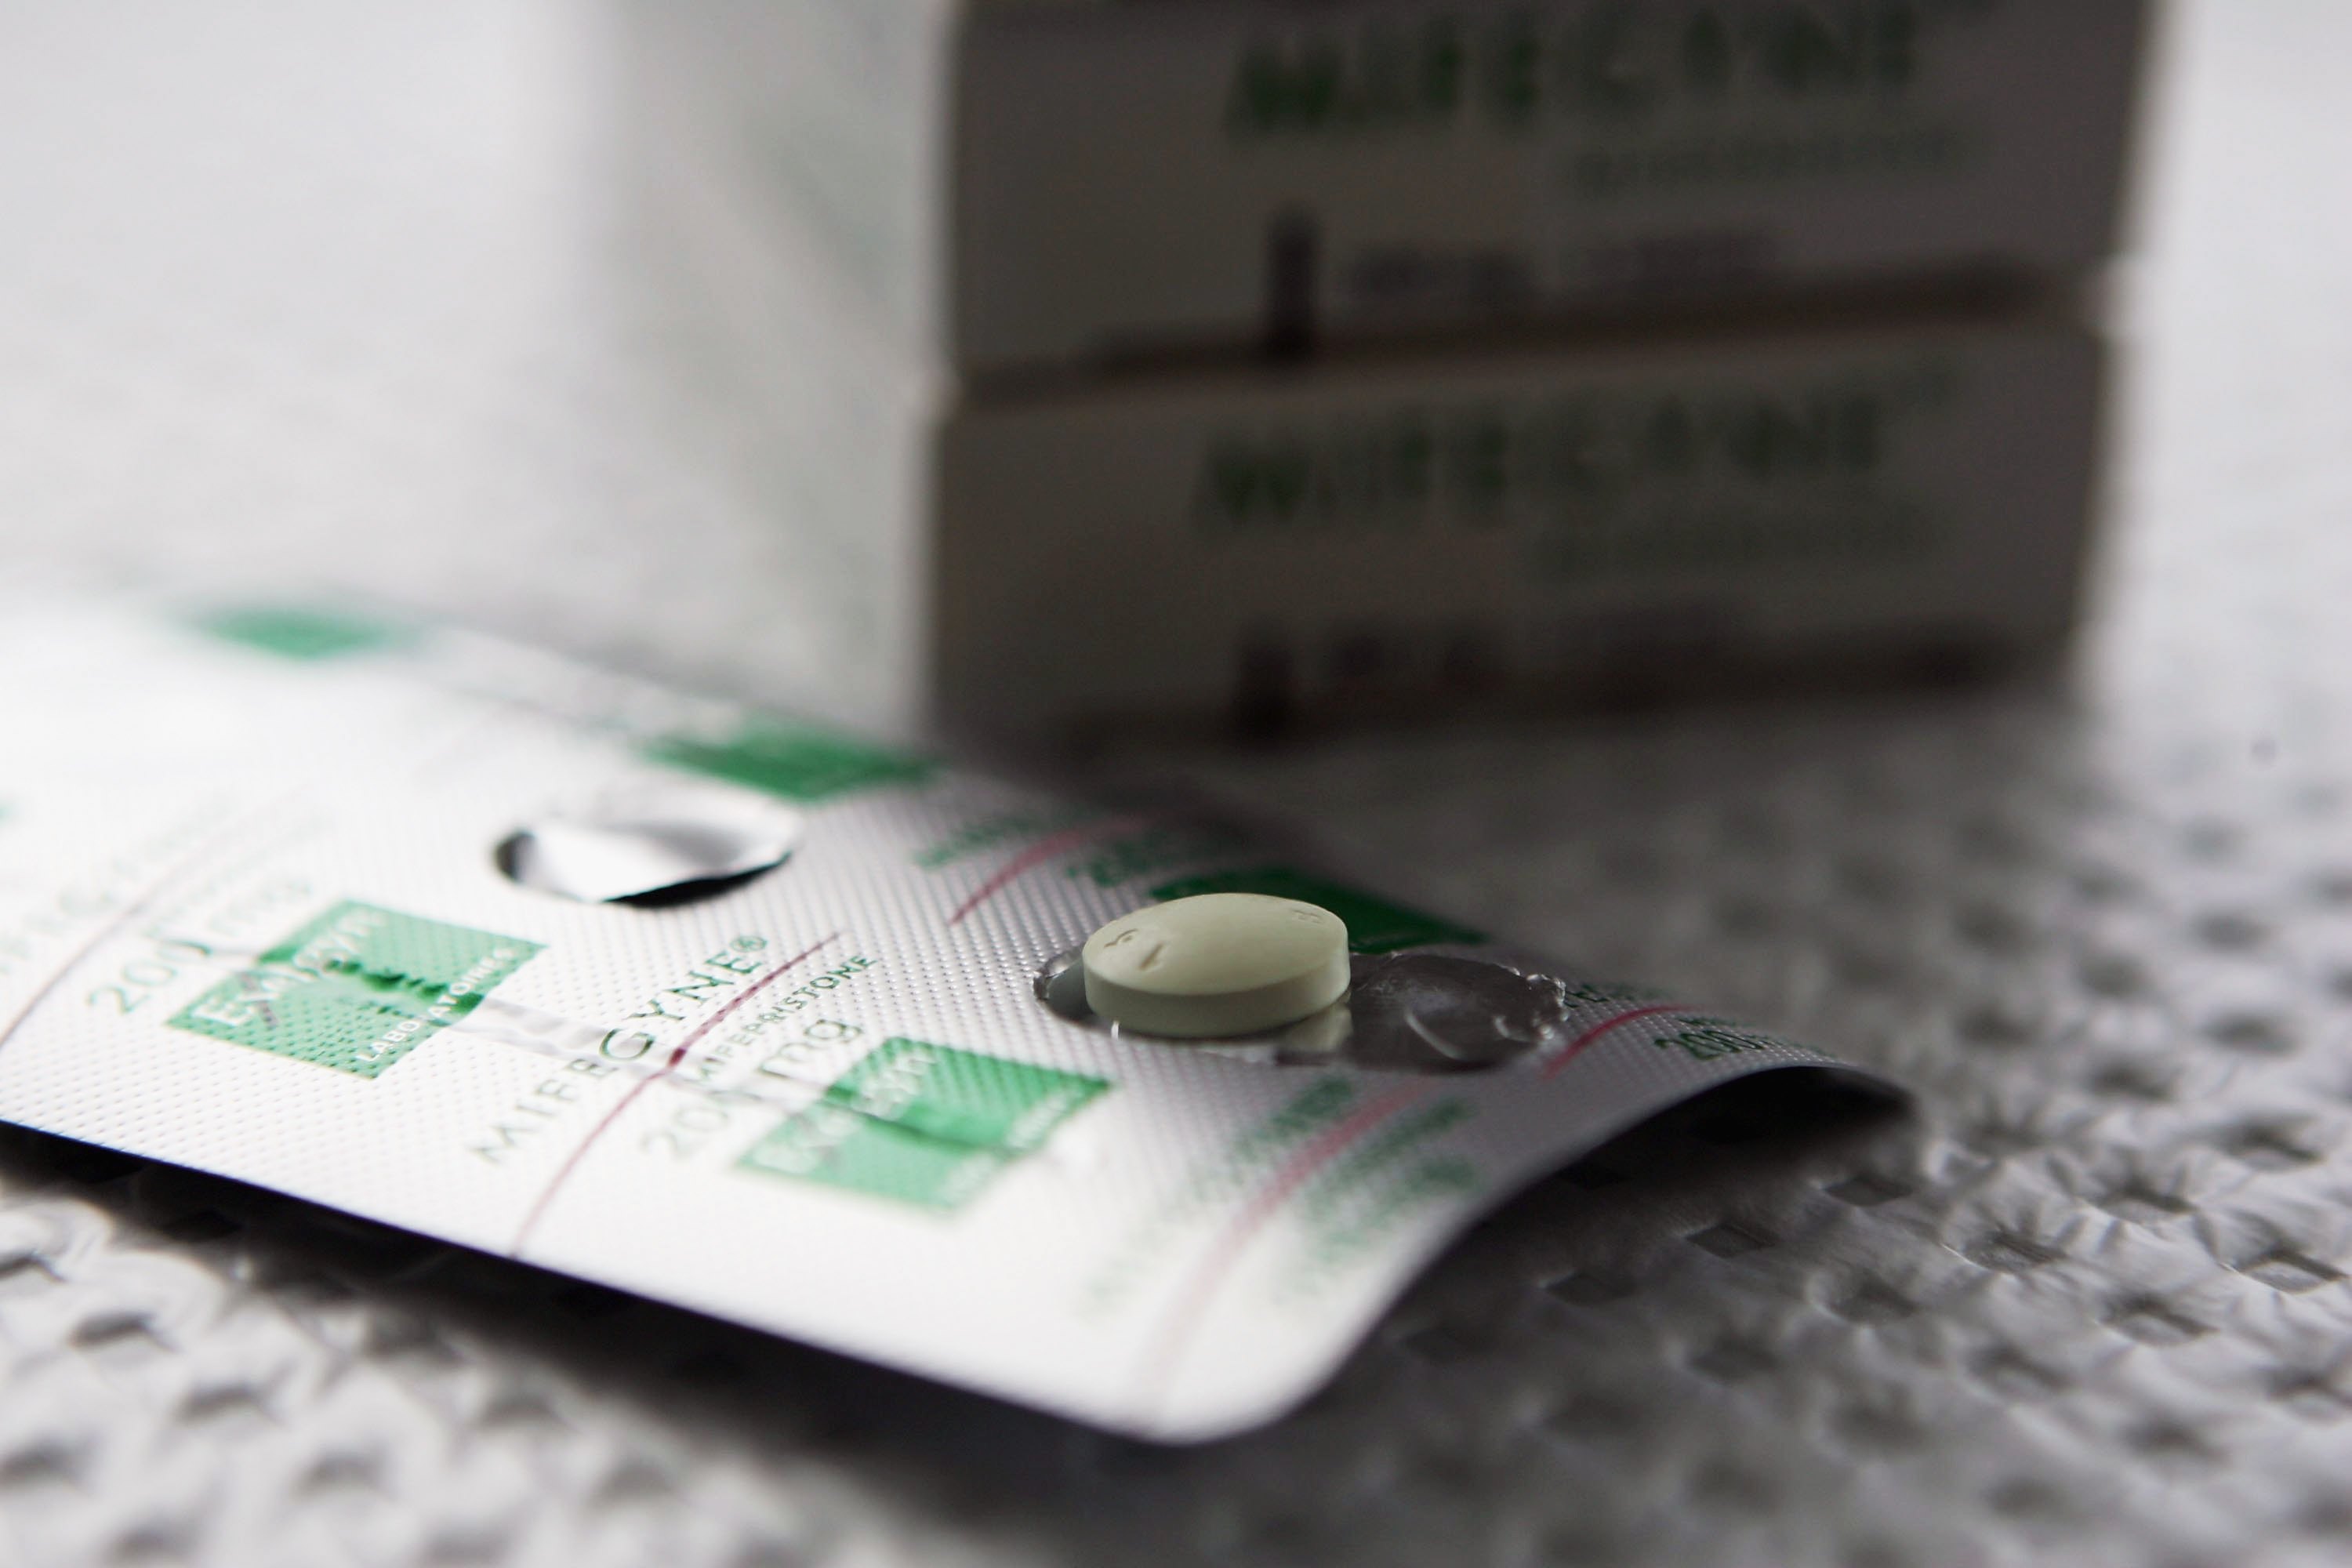 The abortion drug Mifepristone, also known as RU486. (Phil Walter—Getty Images)